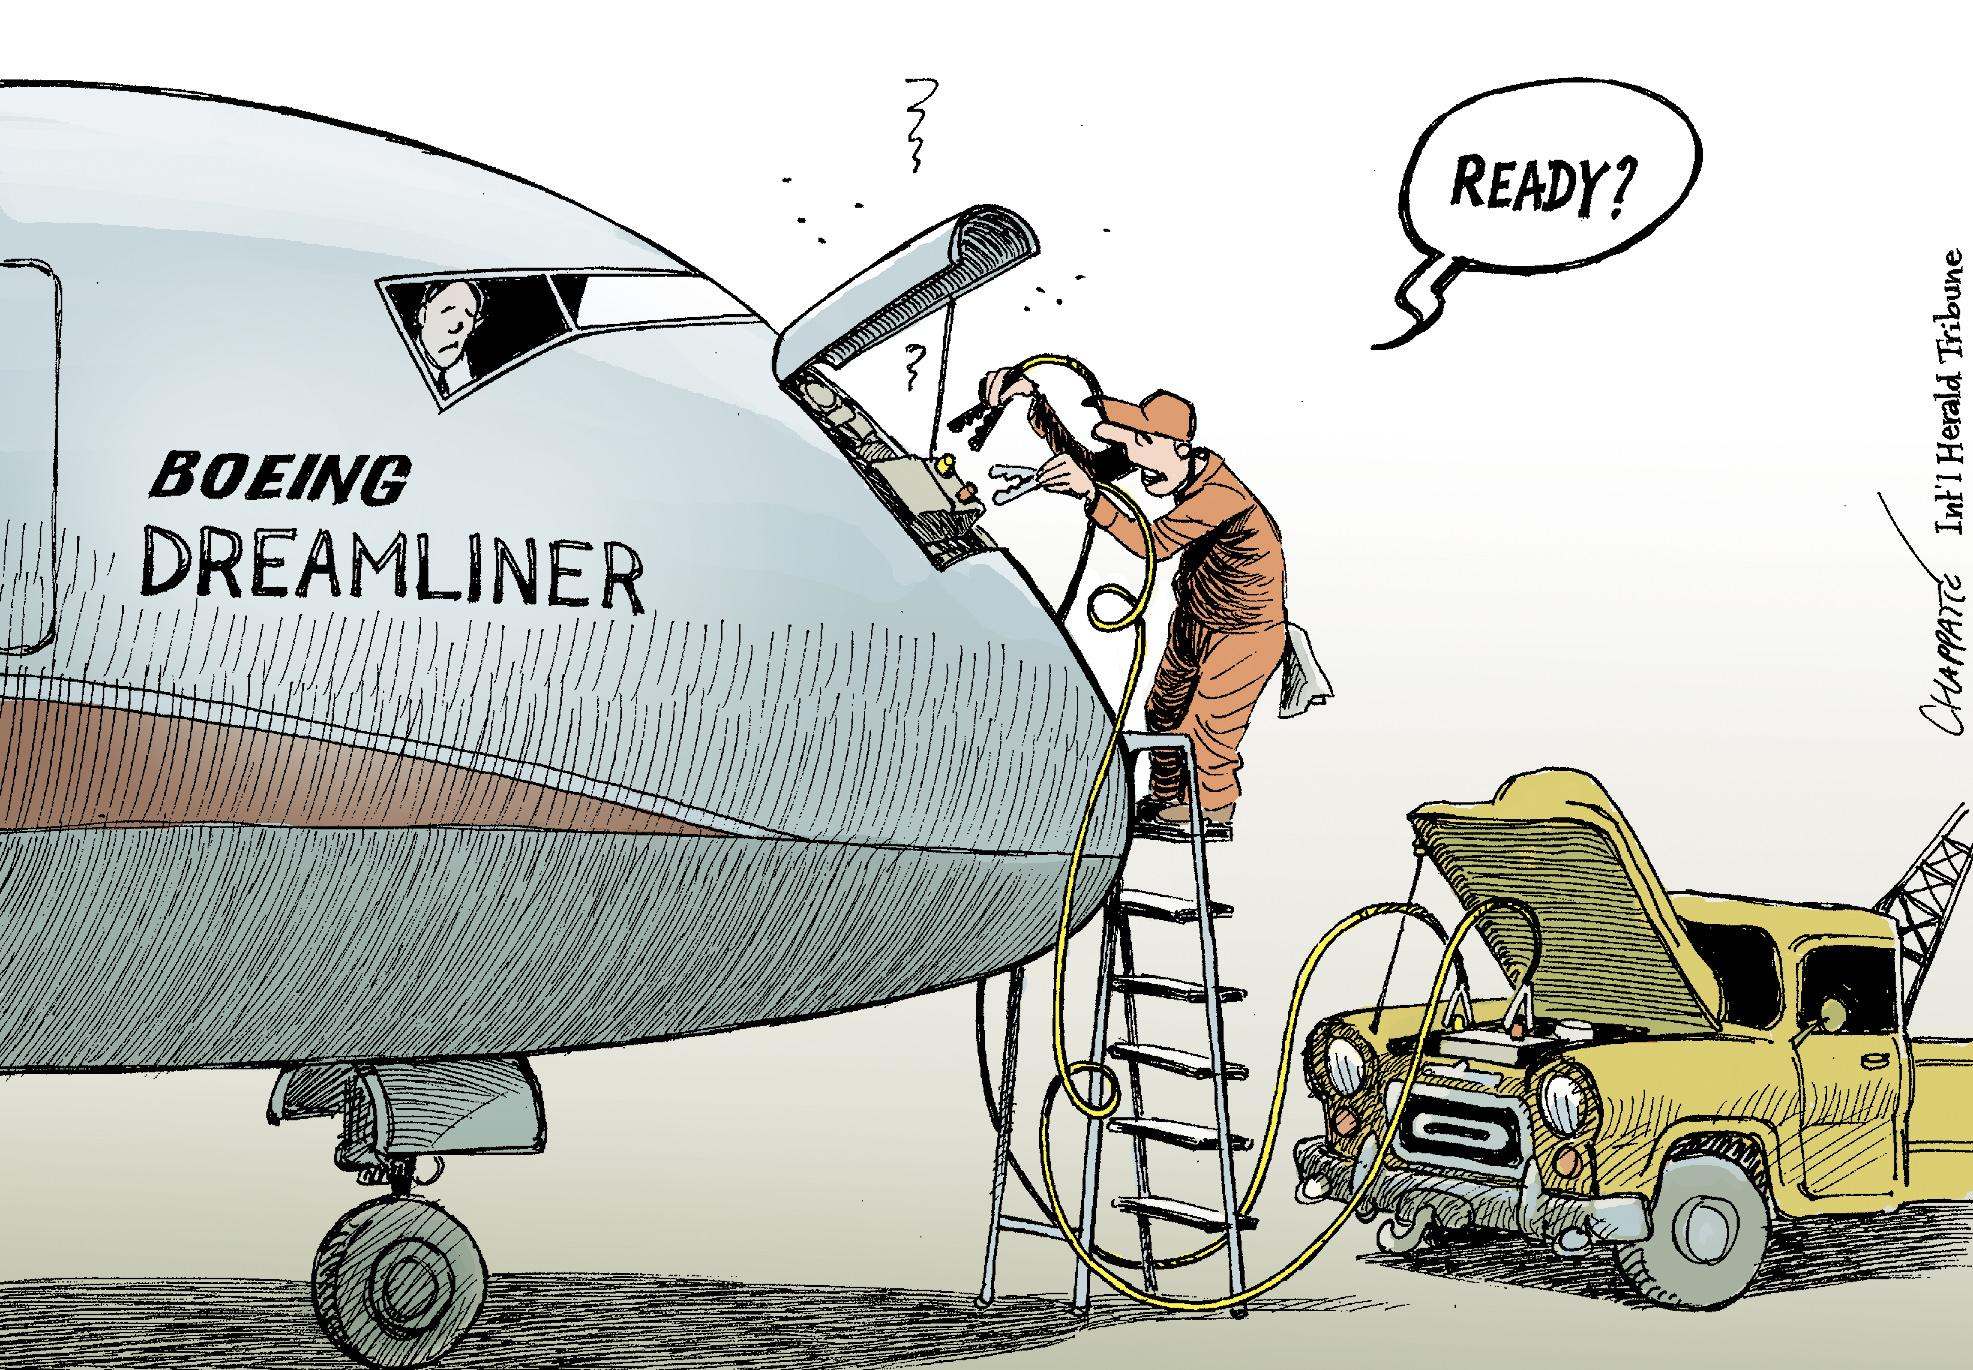 Big trouble with Boeing's Dreamliner